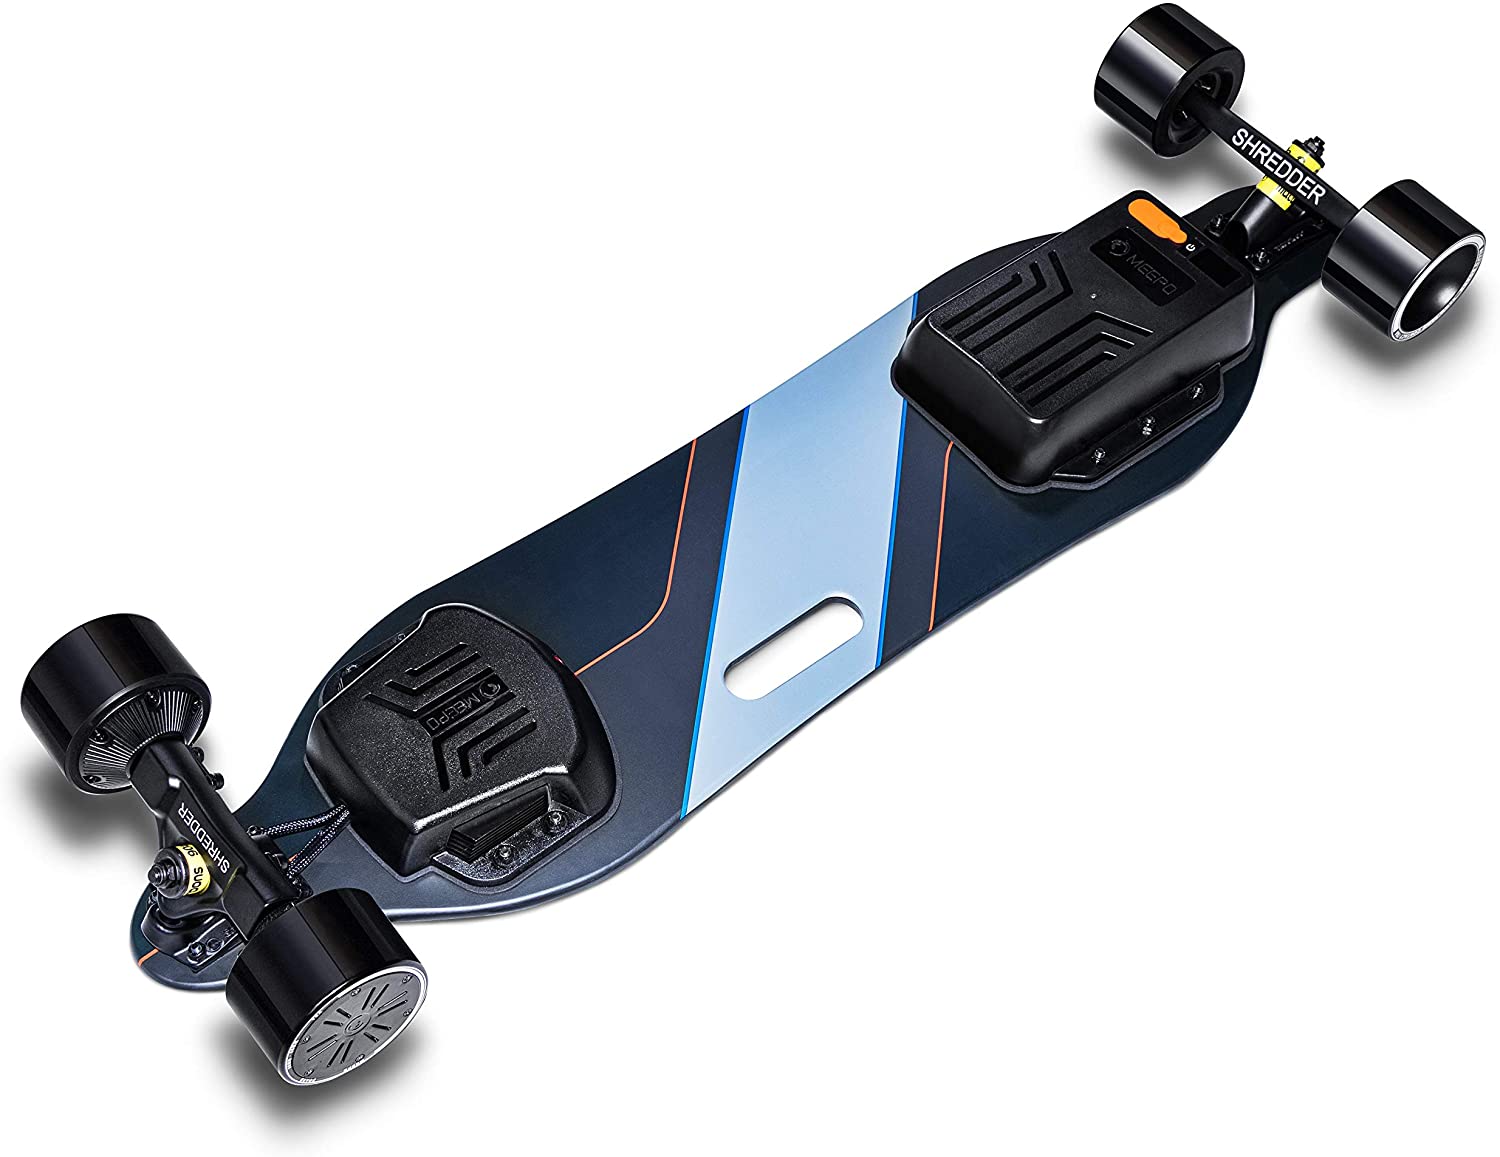 MEEPO V3 Electric Skateboard with Remote - close up